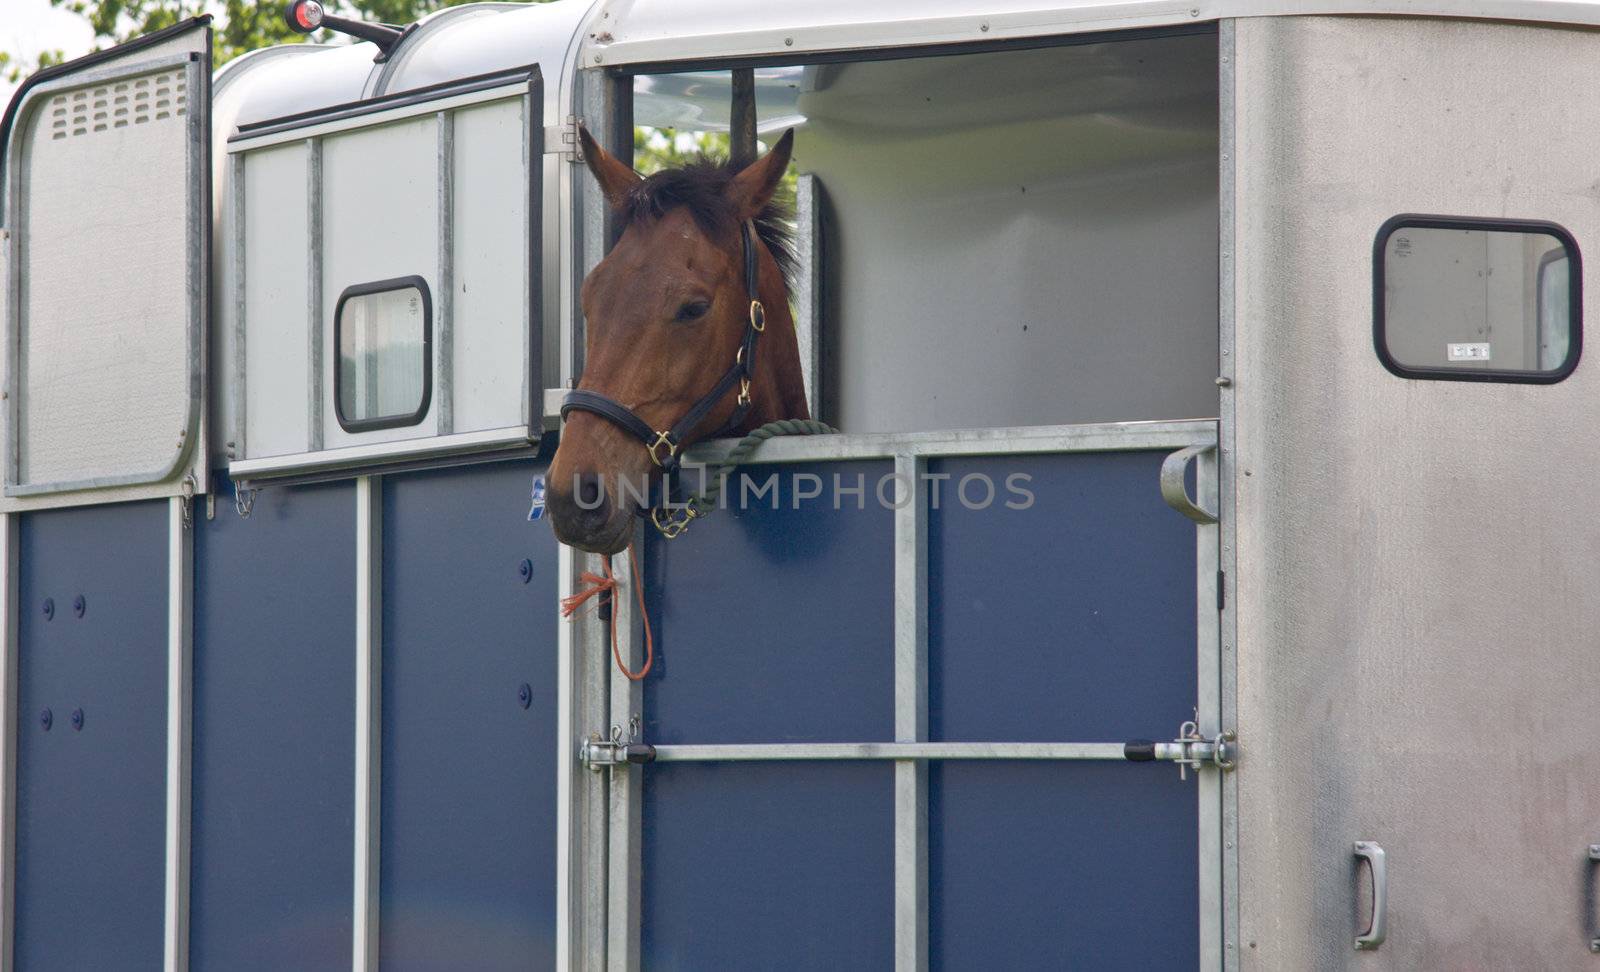 Horse looks out of the trailer after being loaded for the journey home.